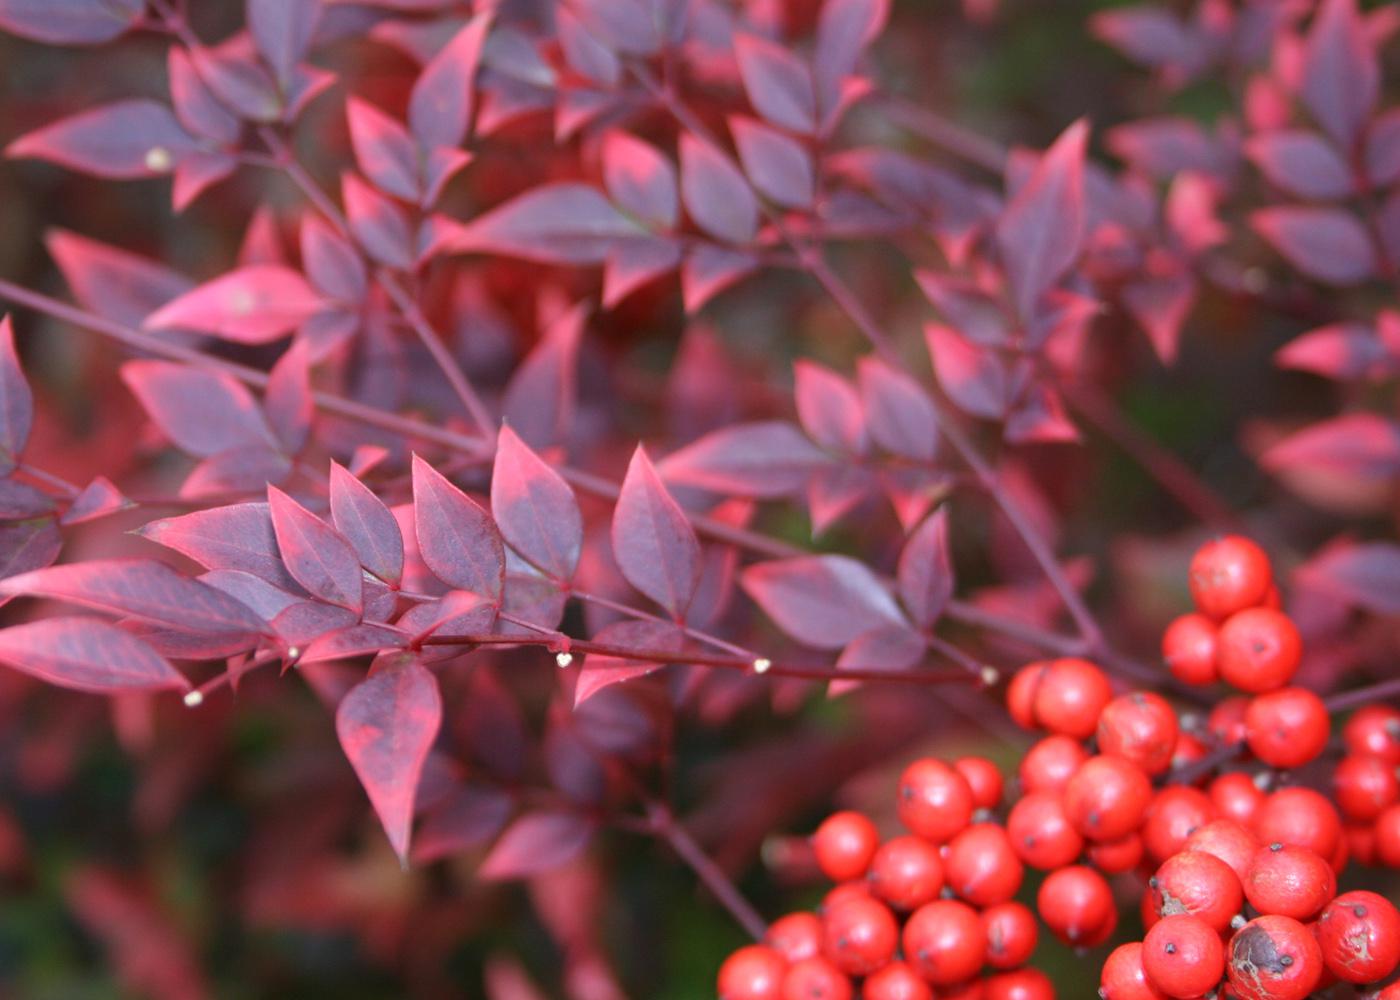 Nandina is a great shrub for providing fall color and berries. The cooler the temperature, the more colorful the plant becomes. Leaves change from bright, glossy green in the summer to a fiery array of reds and burgundies in winter.